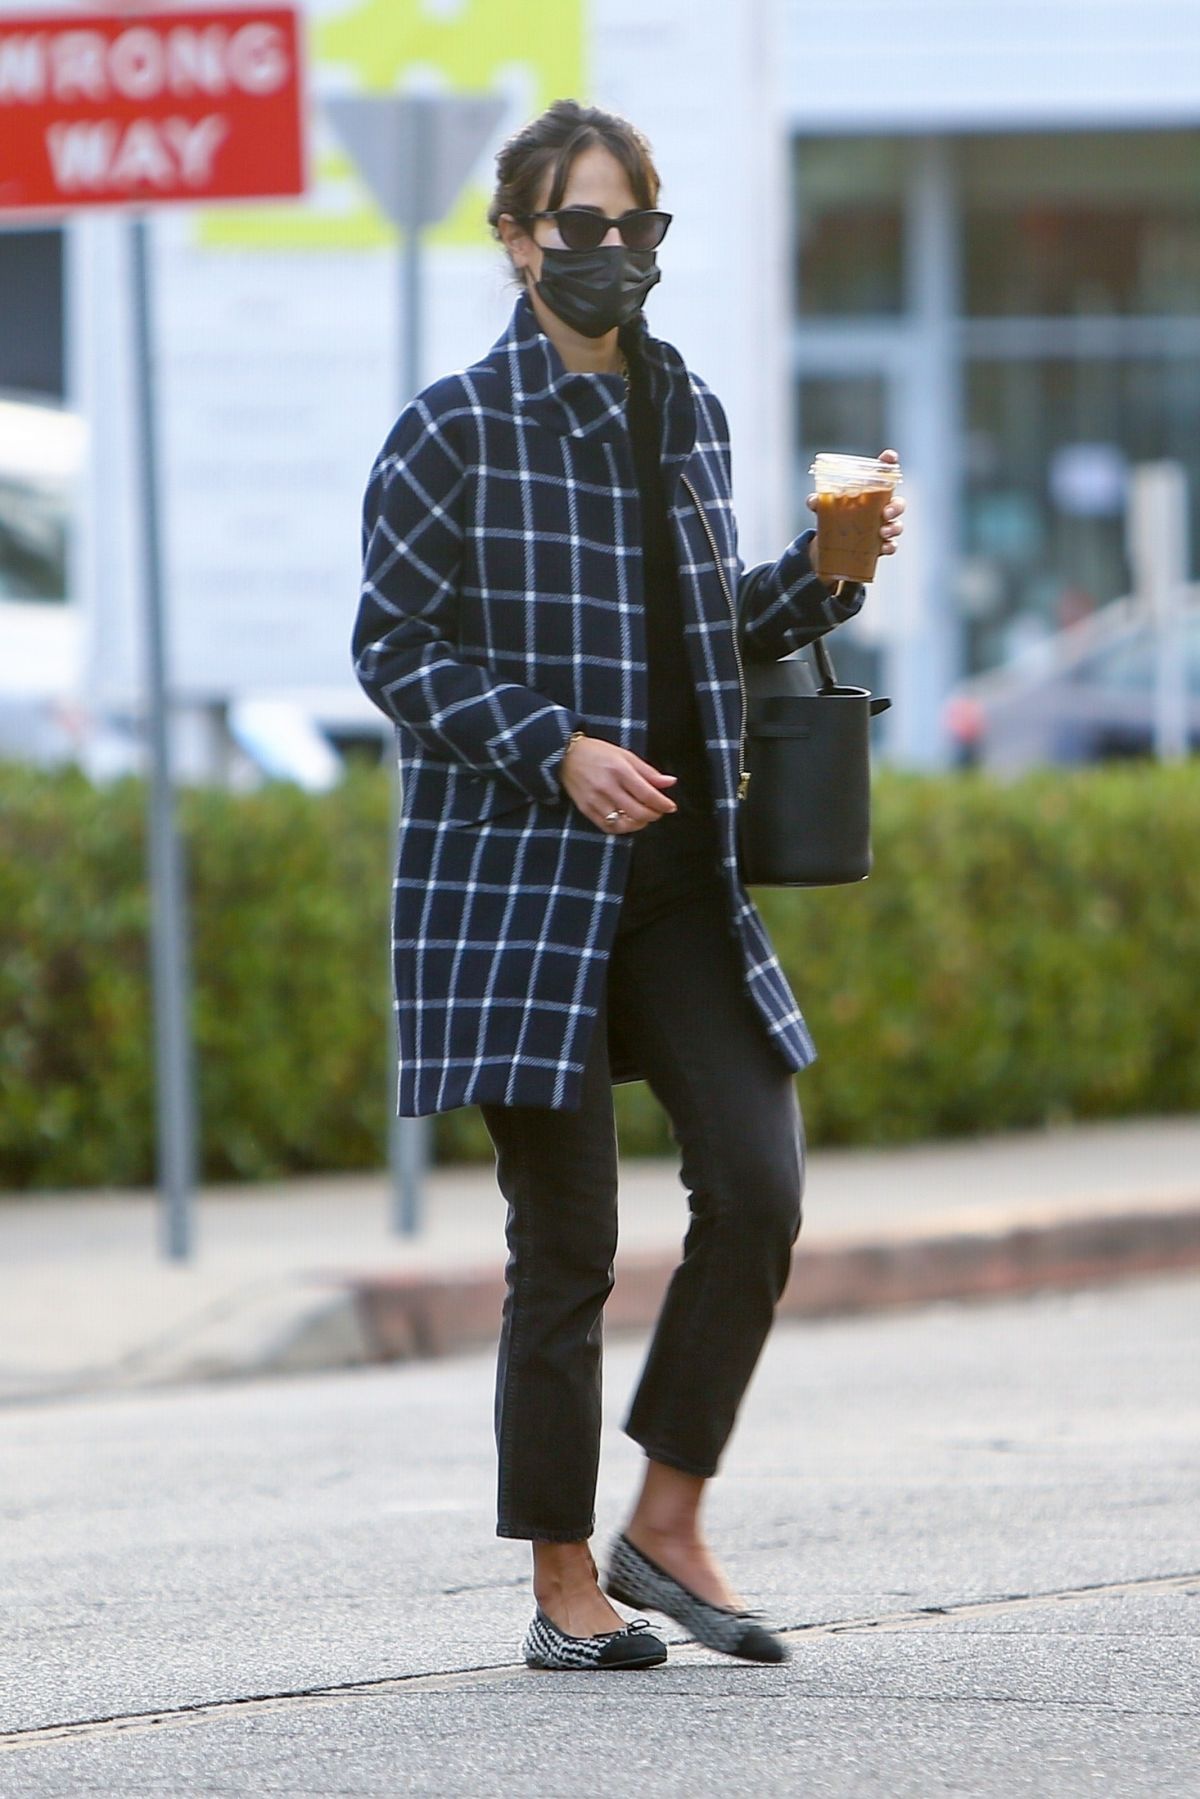 JORDANA BREWSTER Out for Coffee at Brentwood Country Mart 12/17/2020 ...